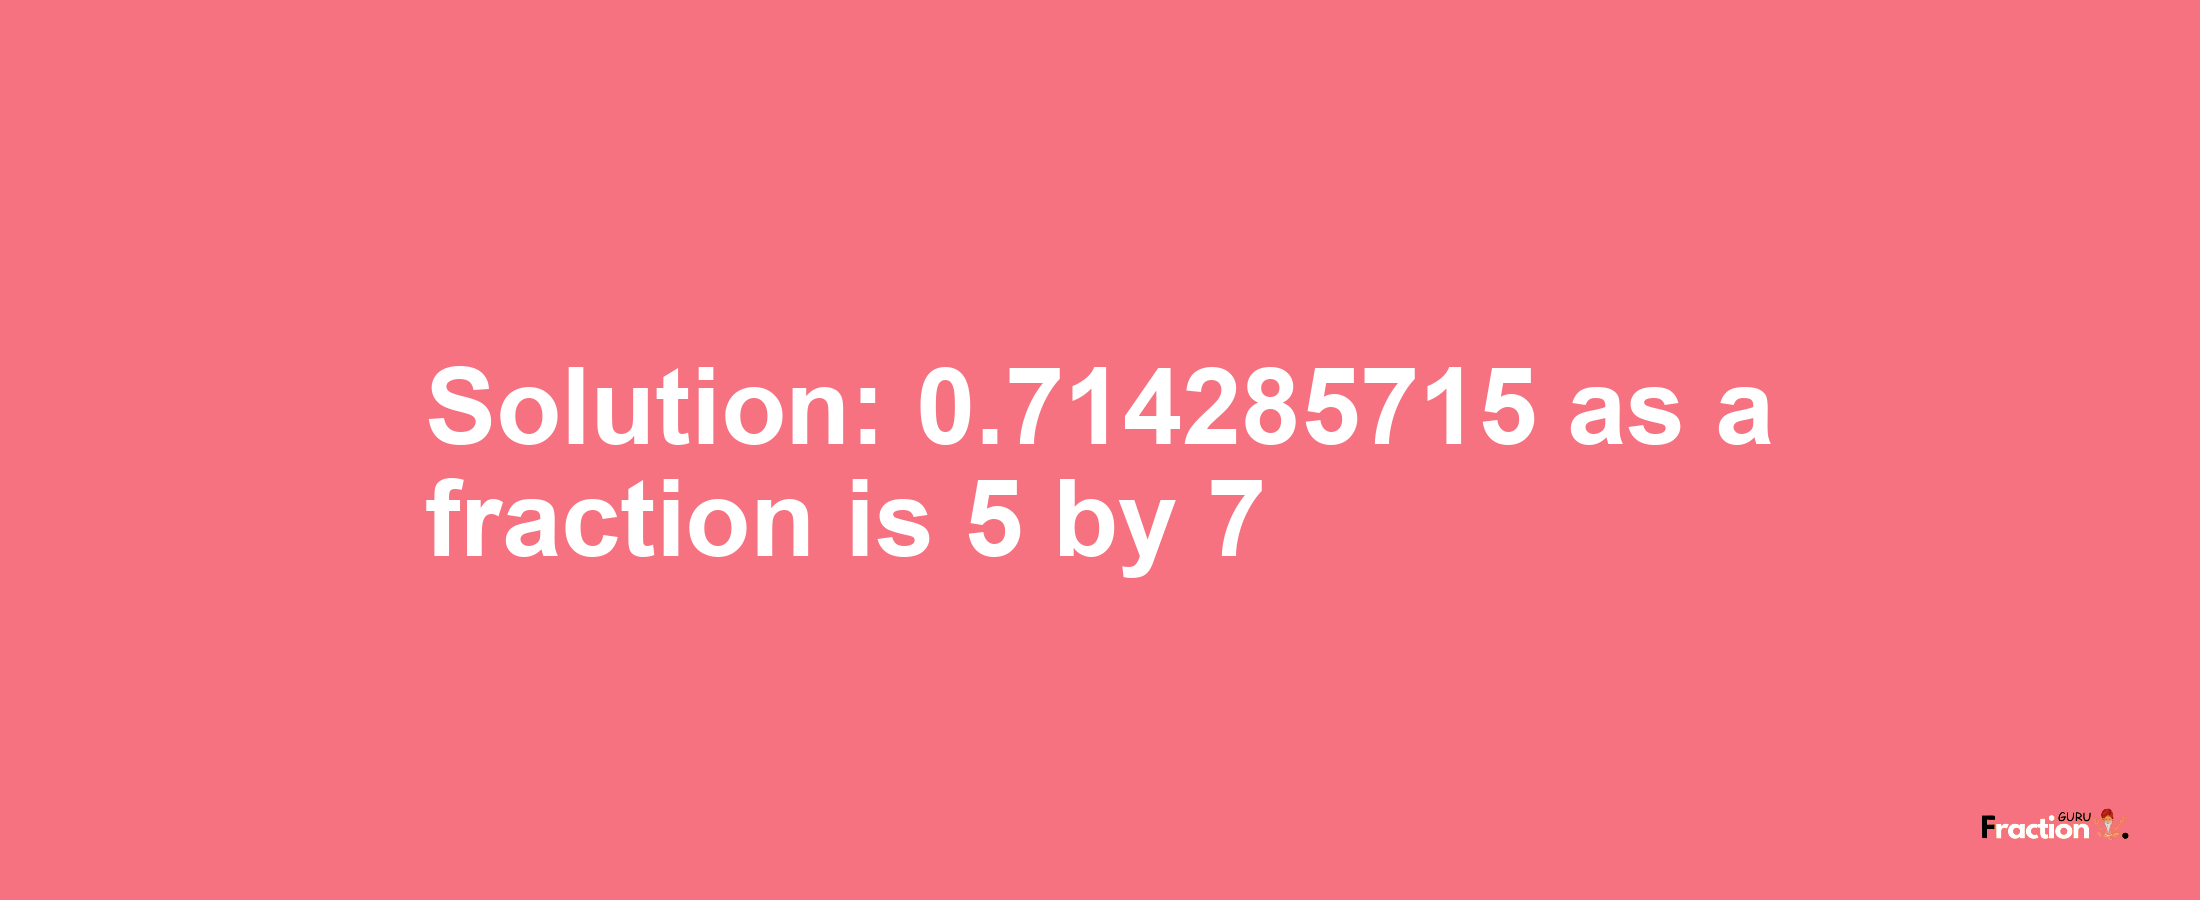 Solution:0.714285715 as a fraction is 5/7